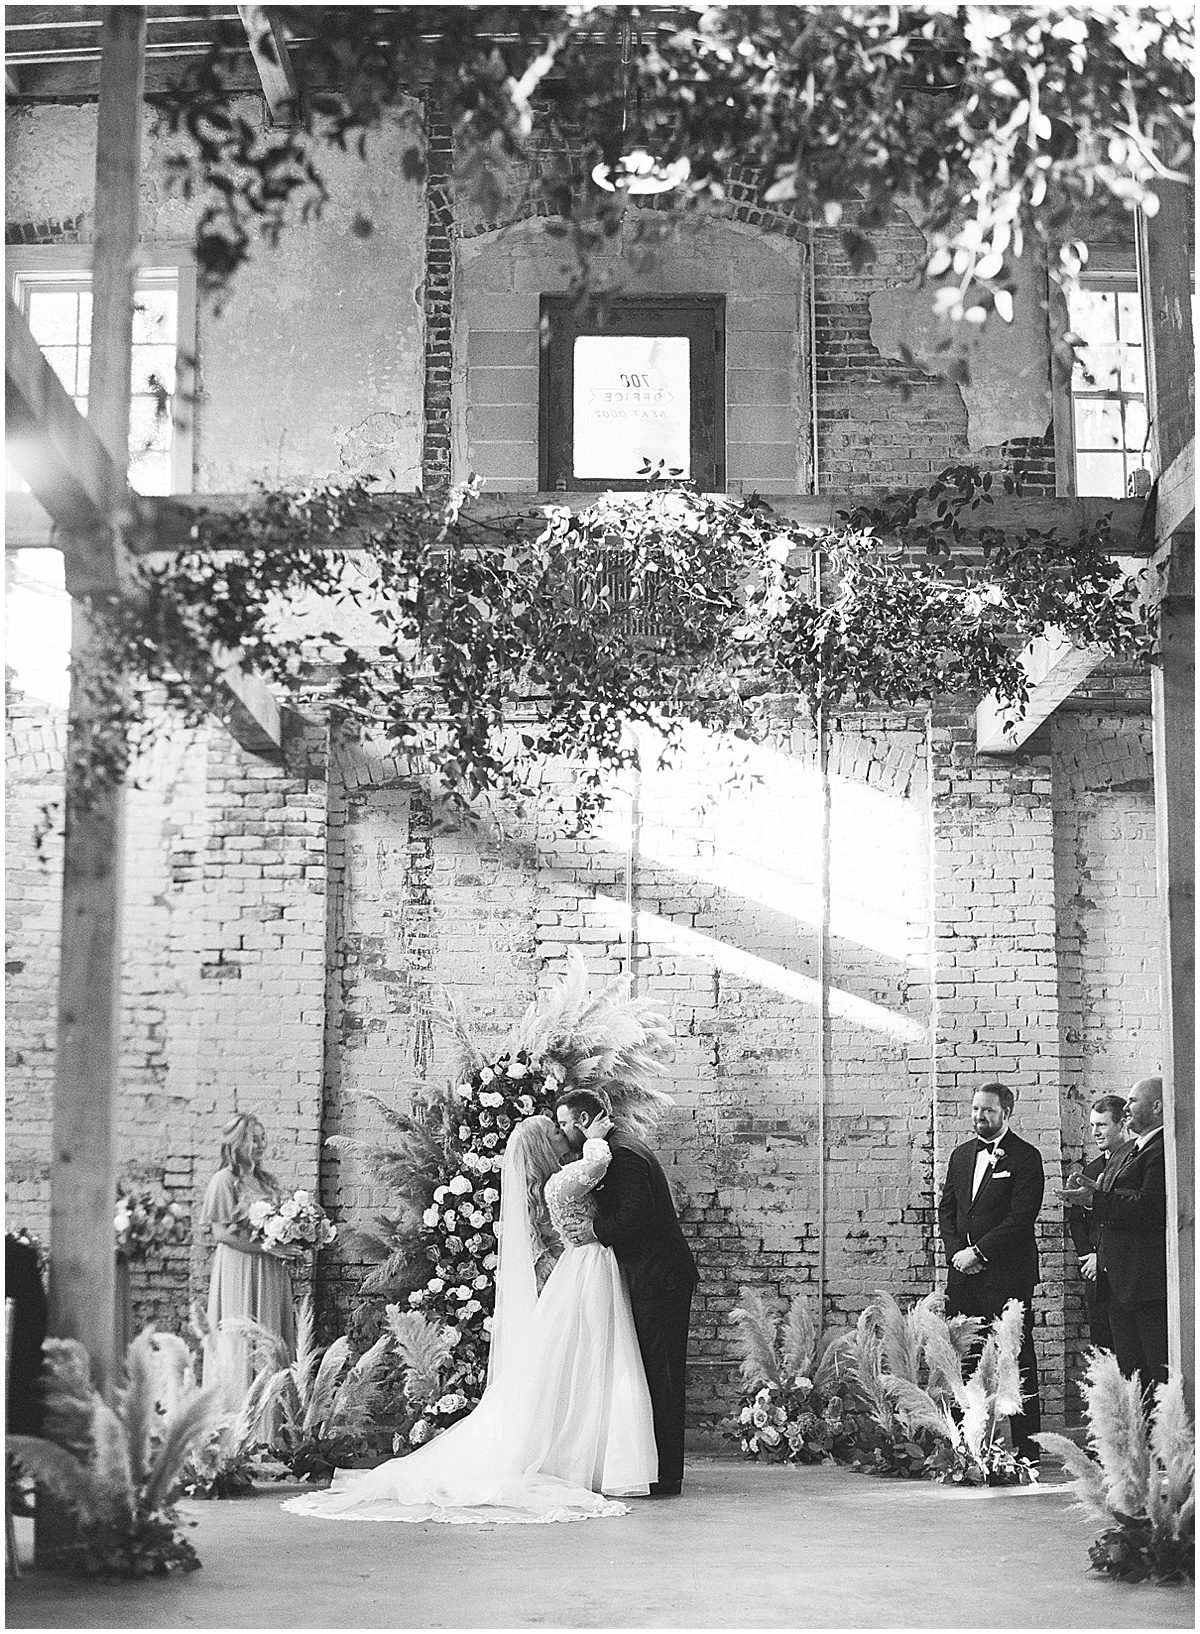 Black and White of Bride and Groom Kissing at Alter During Ceremony Photo